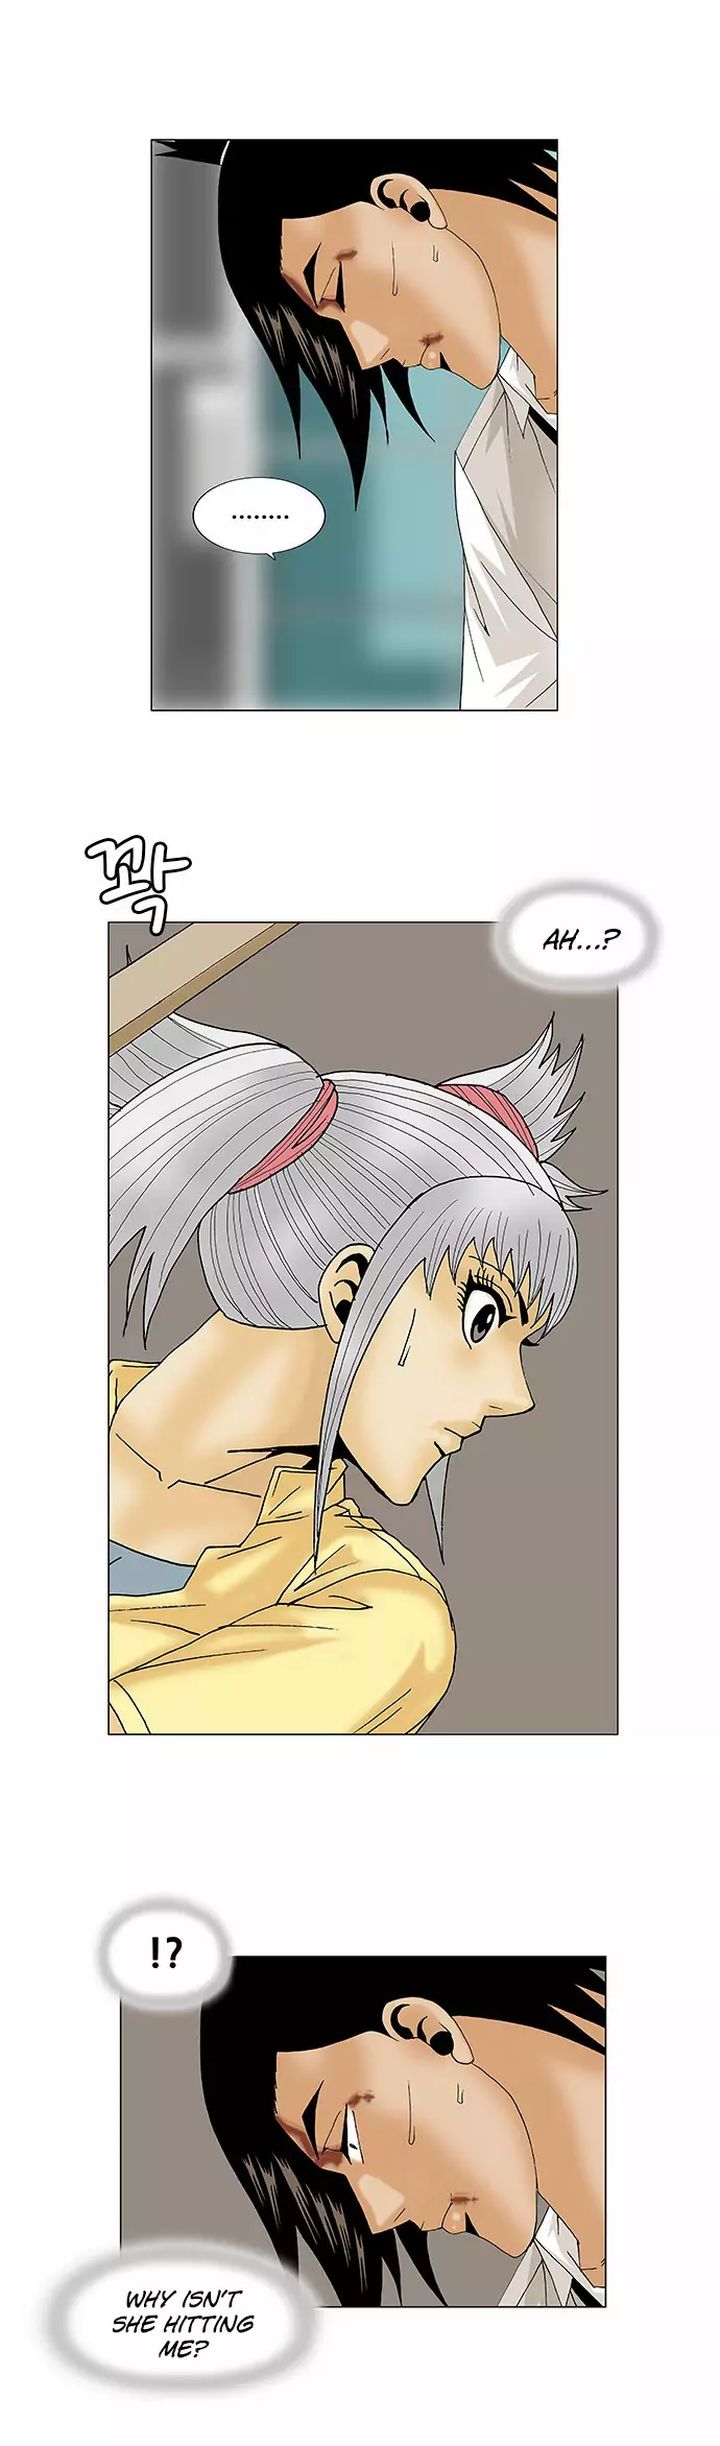 Ultimate Legend Kang Hae Hyo Chapter 91 Page 25